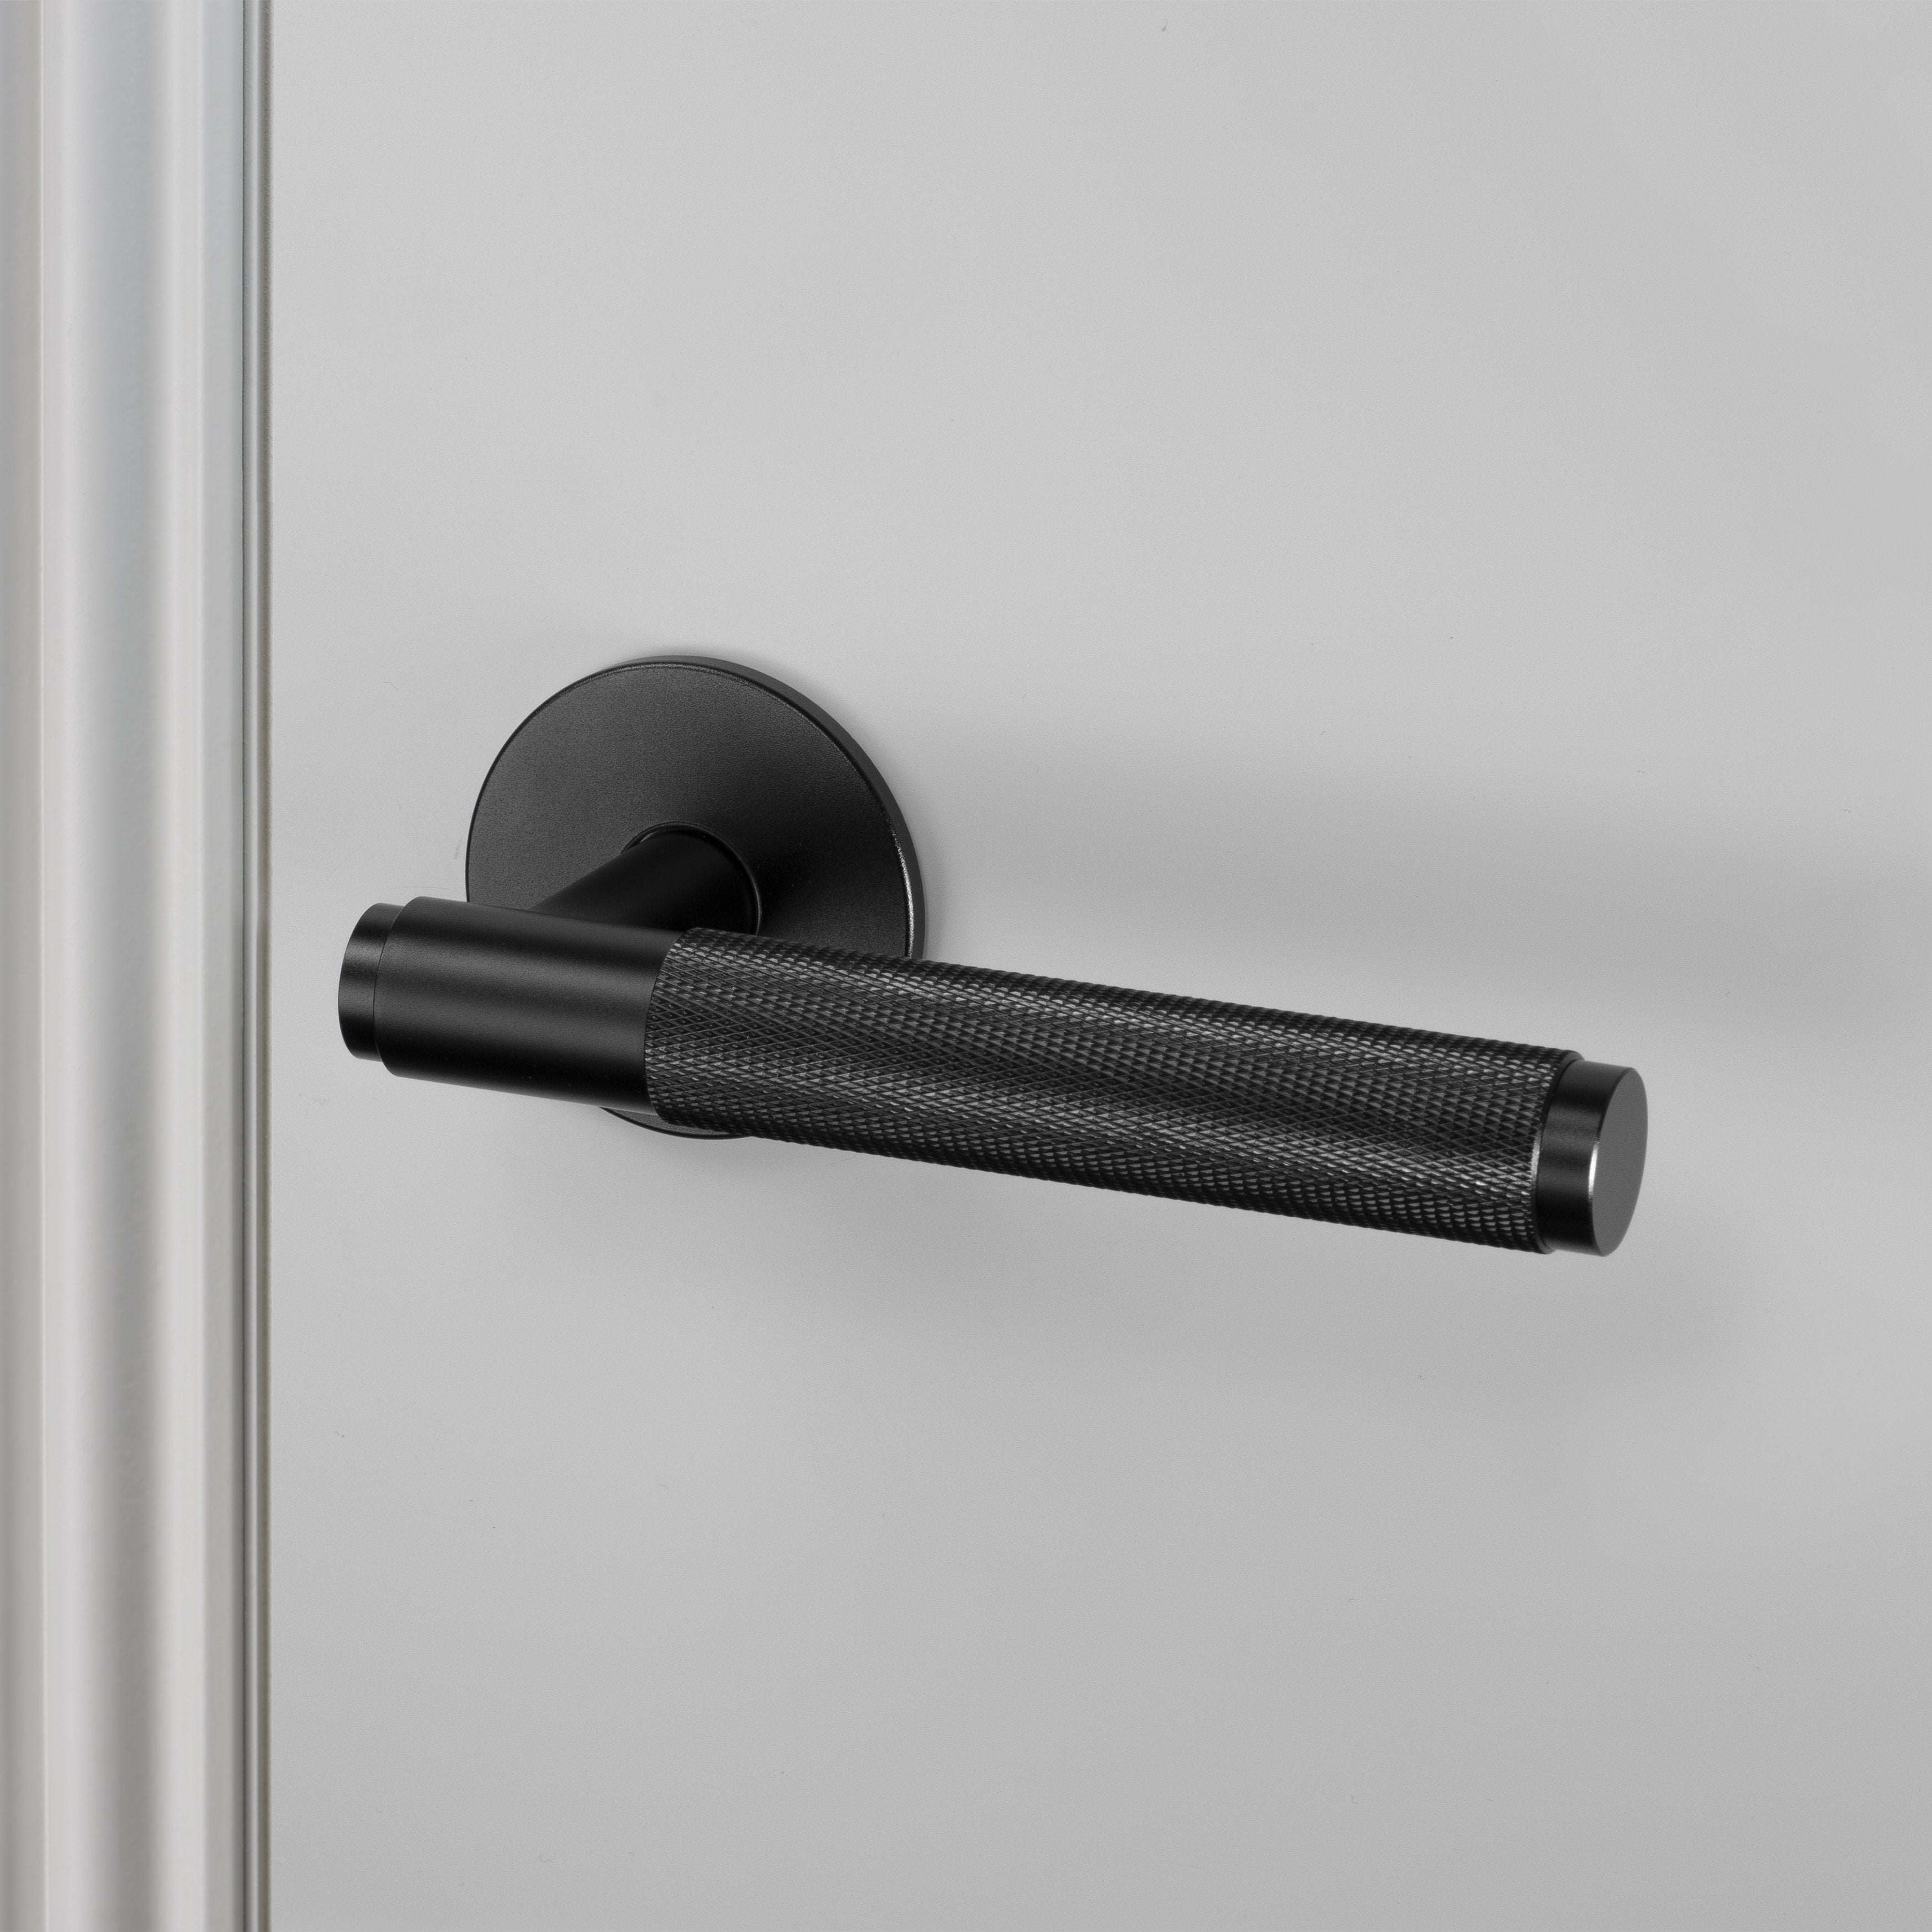 Buster and Punch DOOR LEVER HANDLE / BLACK - SPRUNG -38MM - No.42 Interiors